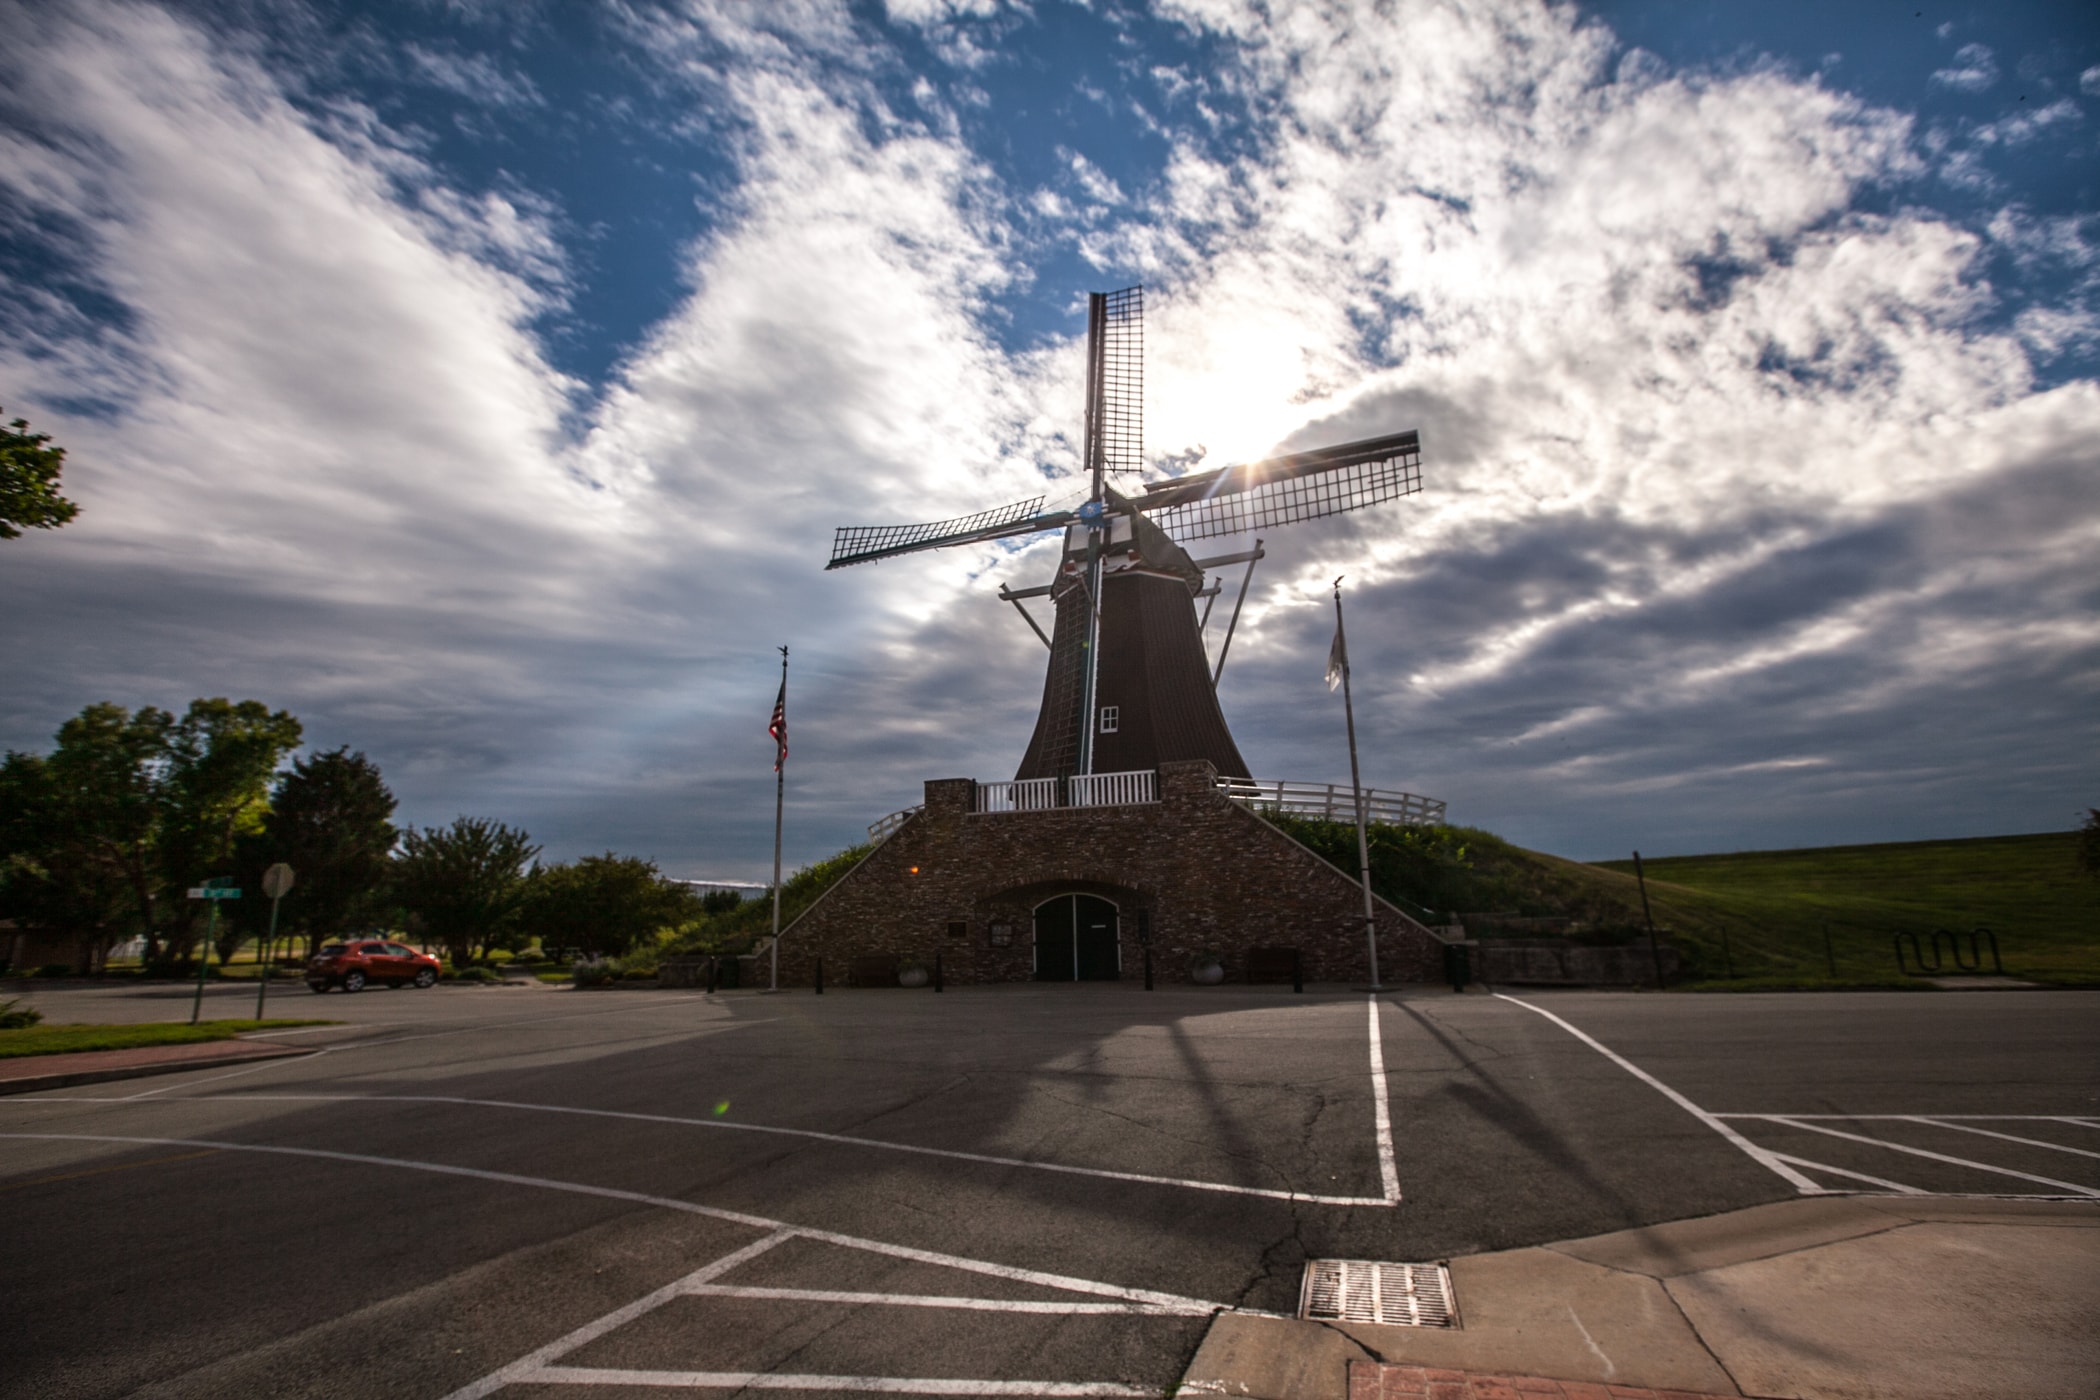 Best Illinois roadside attractions: De Immigrant Windmill in Fulton, Illinois. Visit this roadside attraction on an Illinois road trip with kids or weekend getaway with friends. Add the world's largest De Immigrant Windmill to your road trip bucket list and visit them on your next travel adventure.